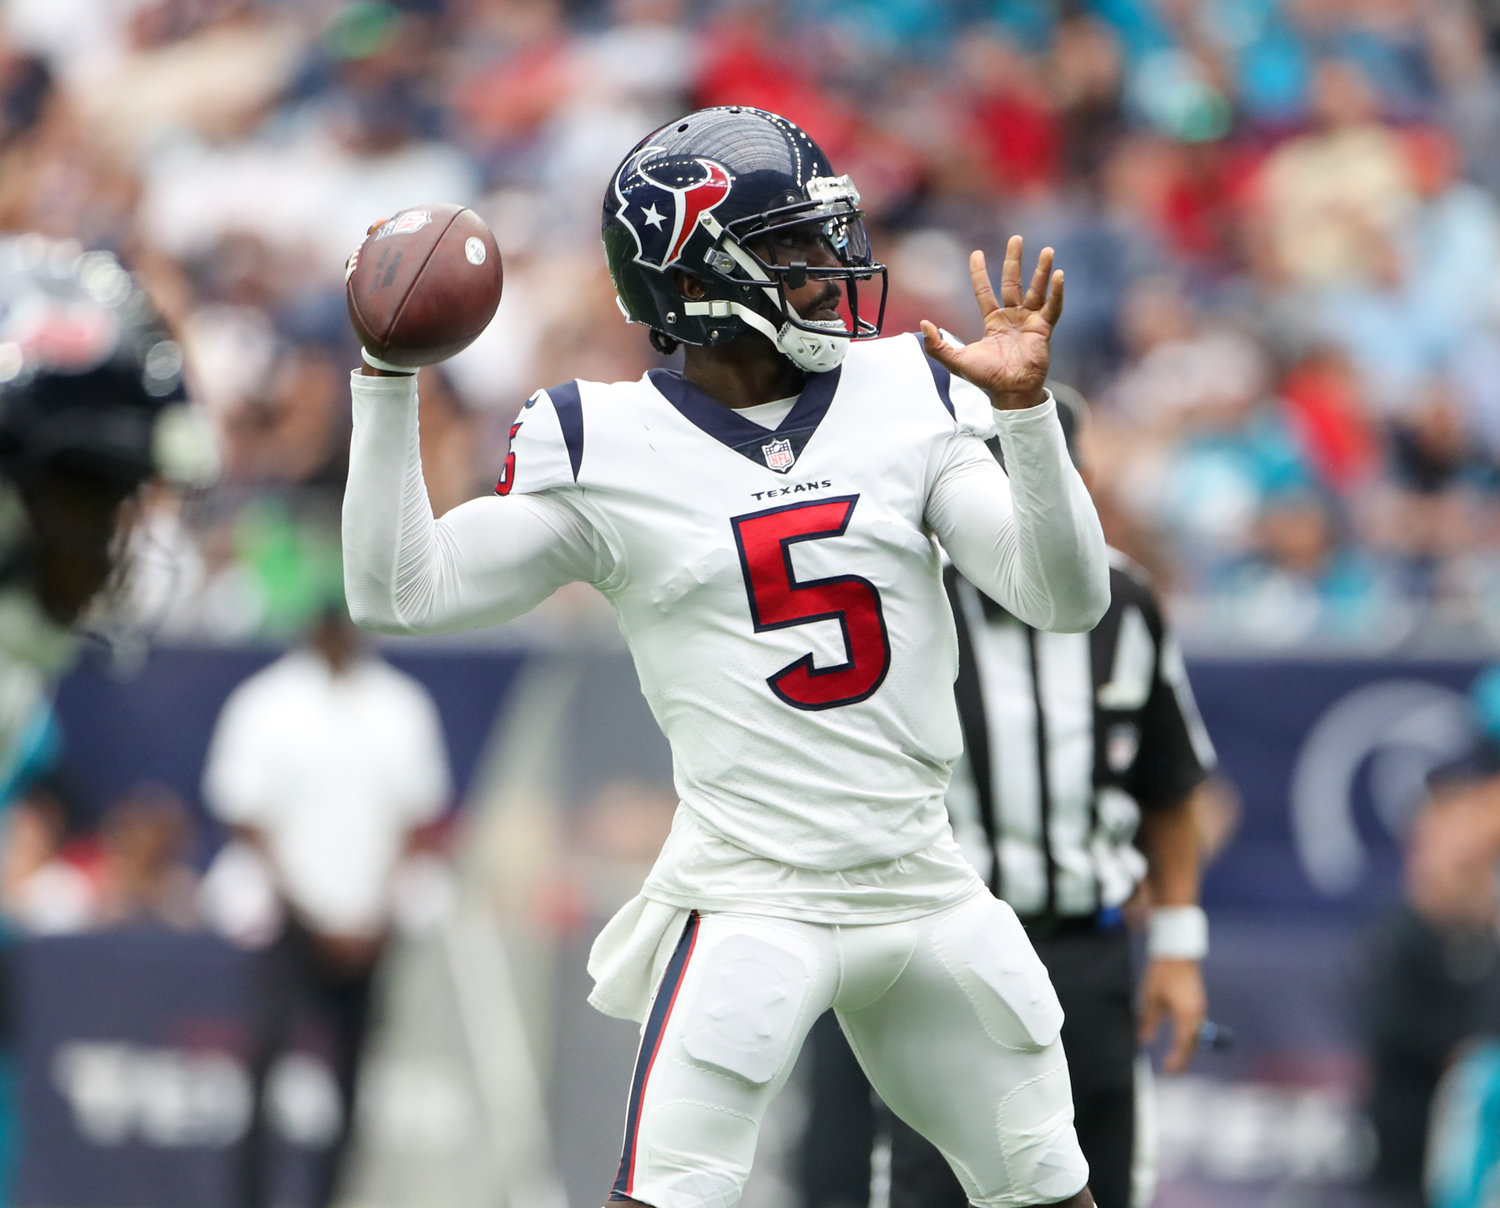 Houston Texans quarterback Tyrod Taylor (5) looks to pass during the first half of an NFL game between the Houston Texans and the Jacksonville Jaguars on September 12, 2021 in Houston, Texas.